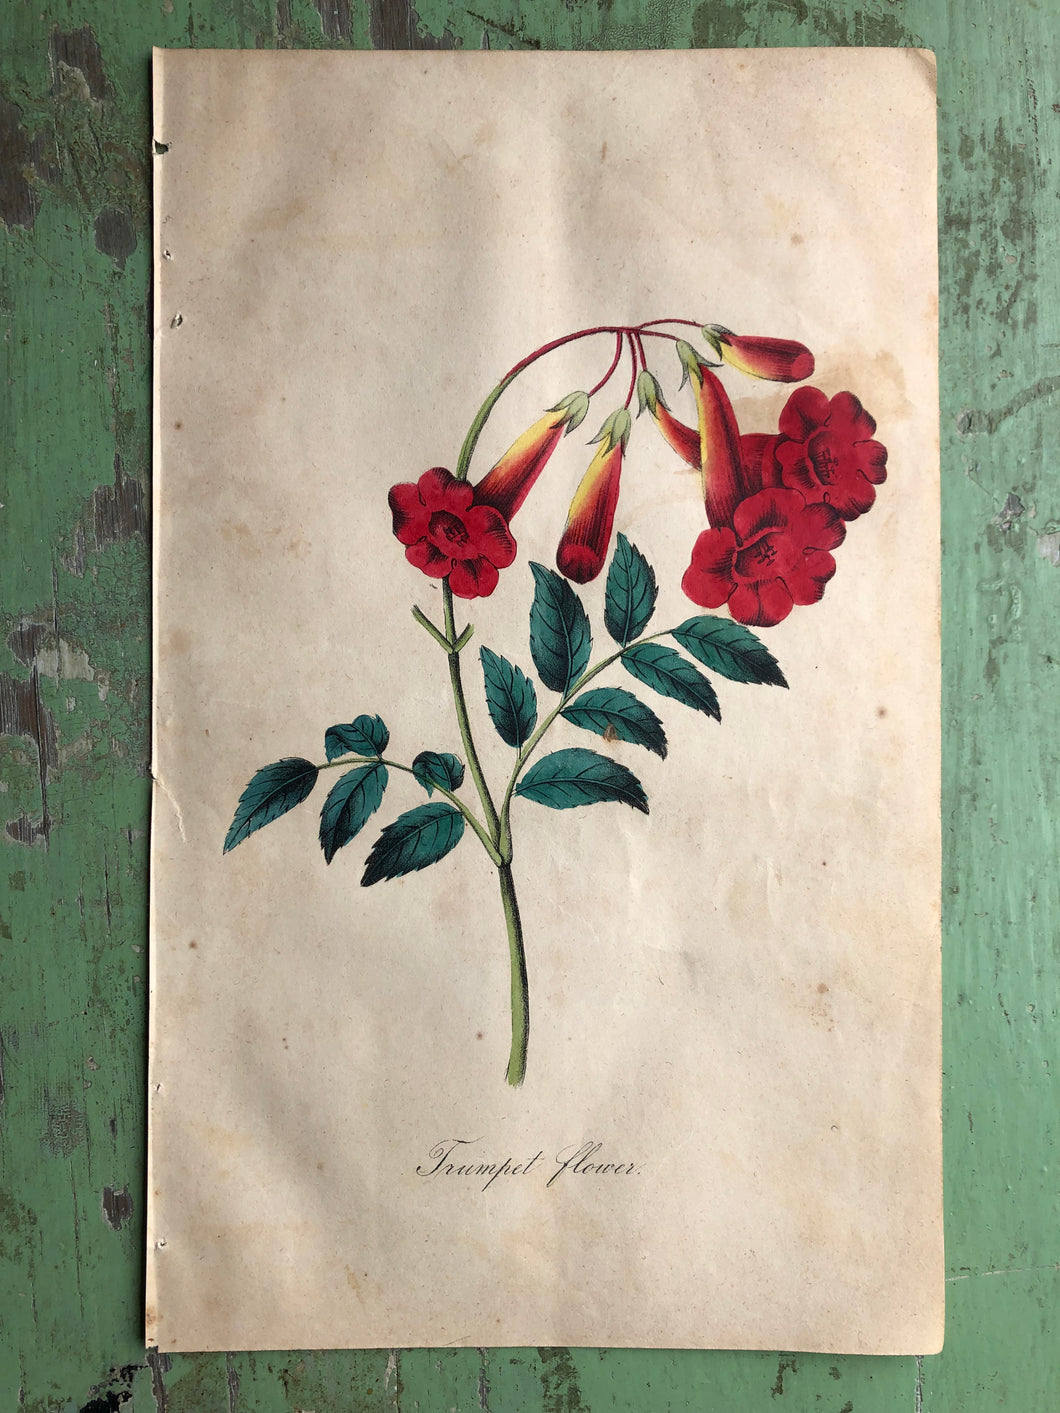 Trumpet Flower. Hand-Colored Print from 